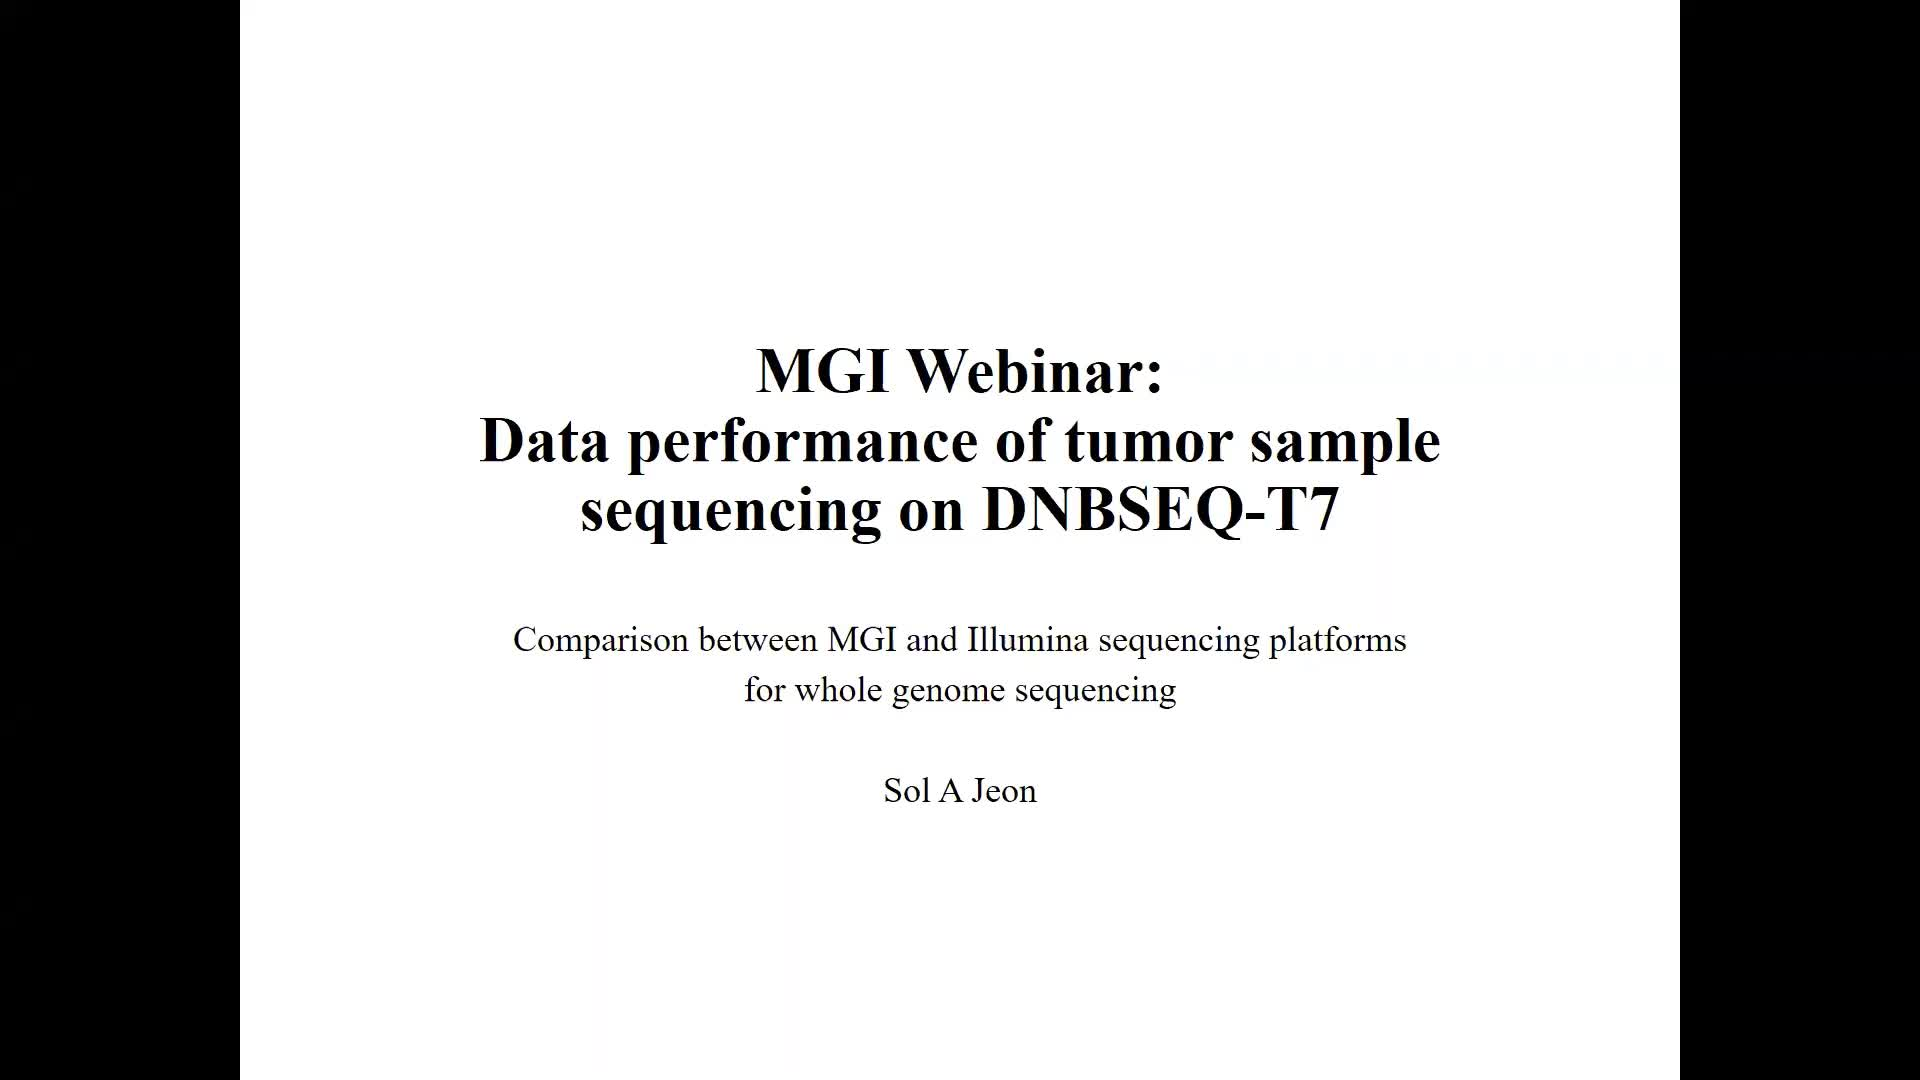 Data performance of tumor sample sequencing on DNBSEQ-T7